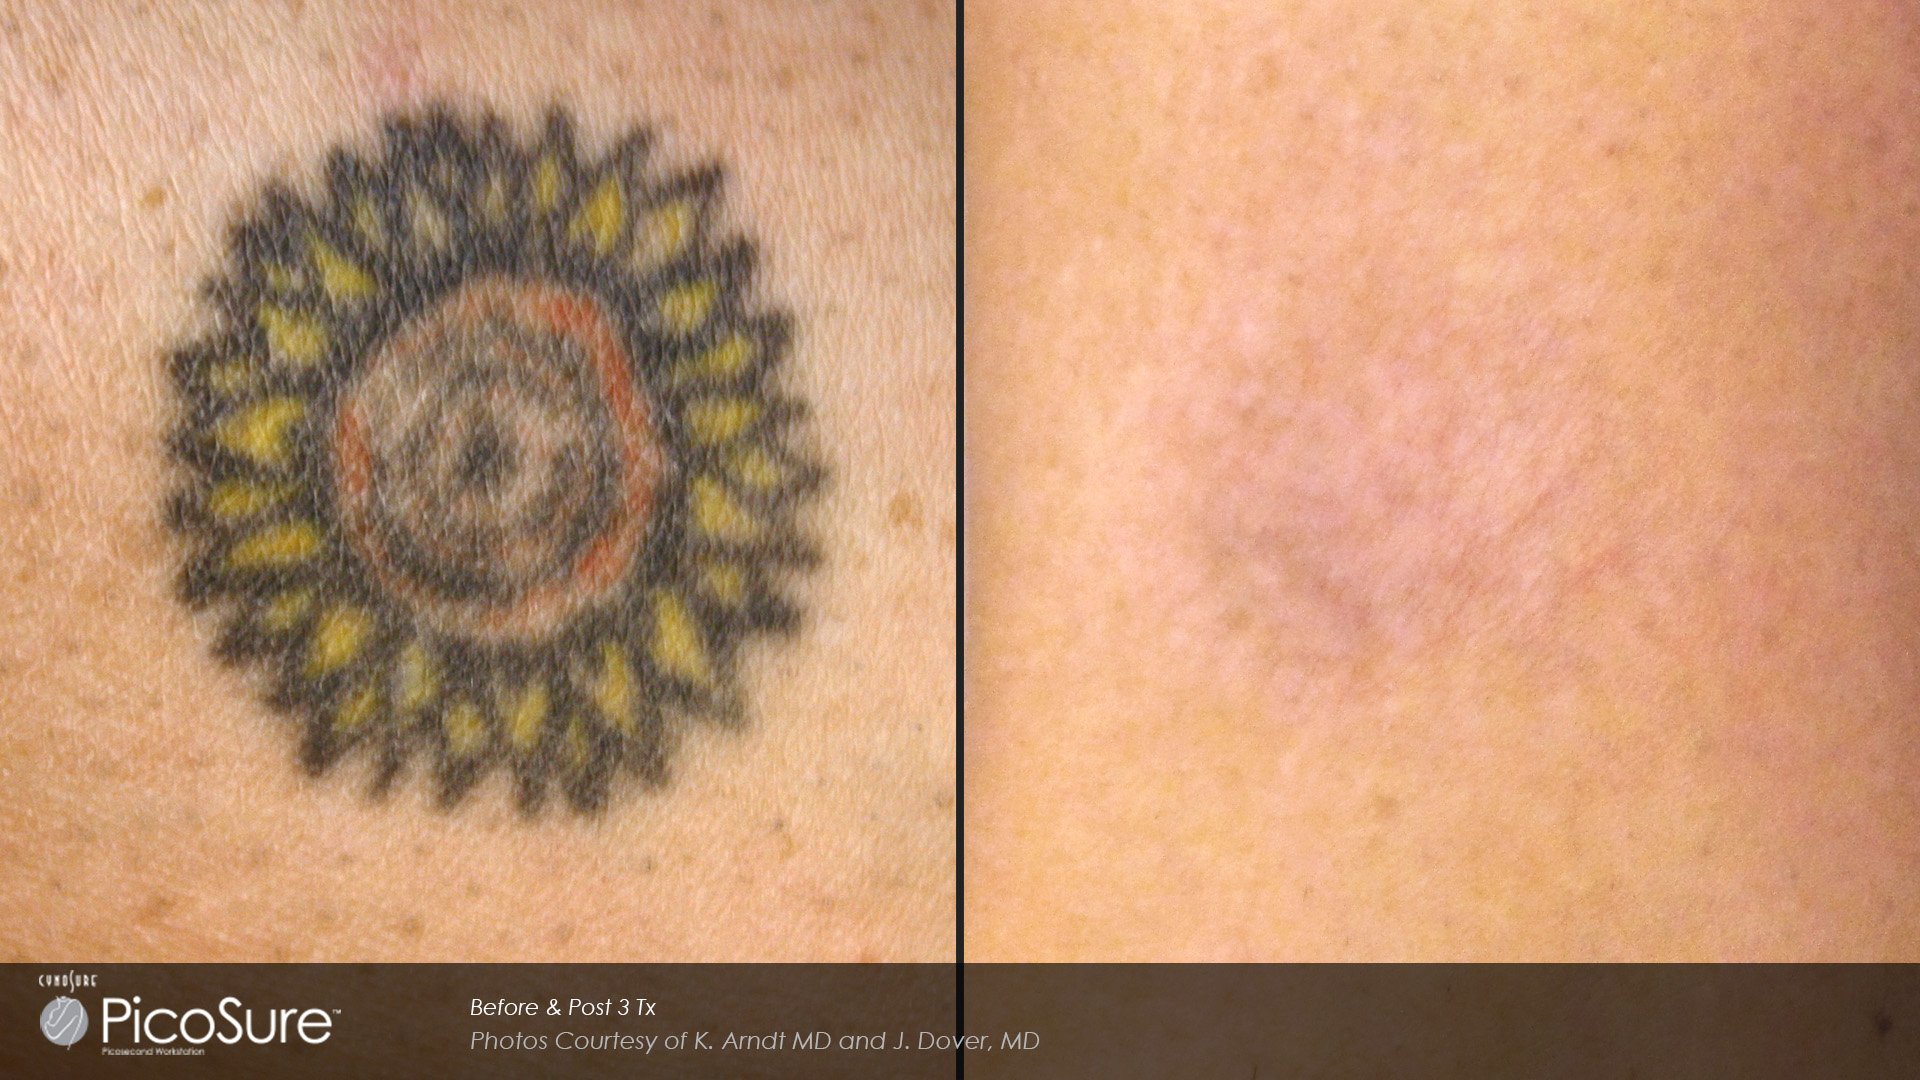 Before and after laser tattoo removal results